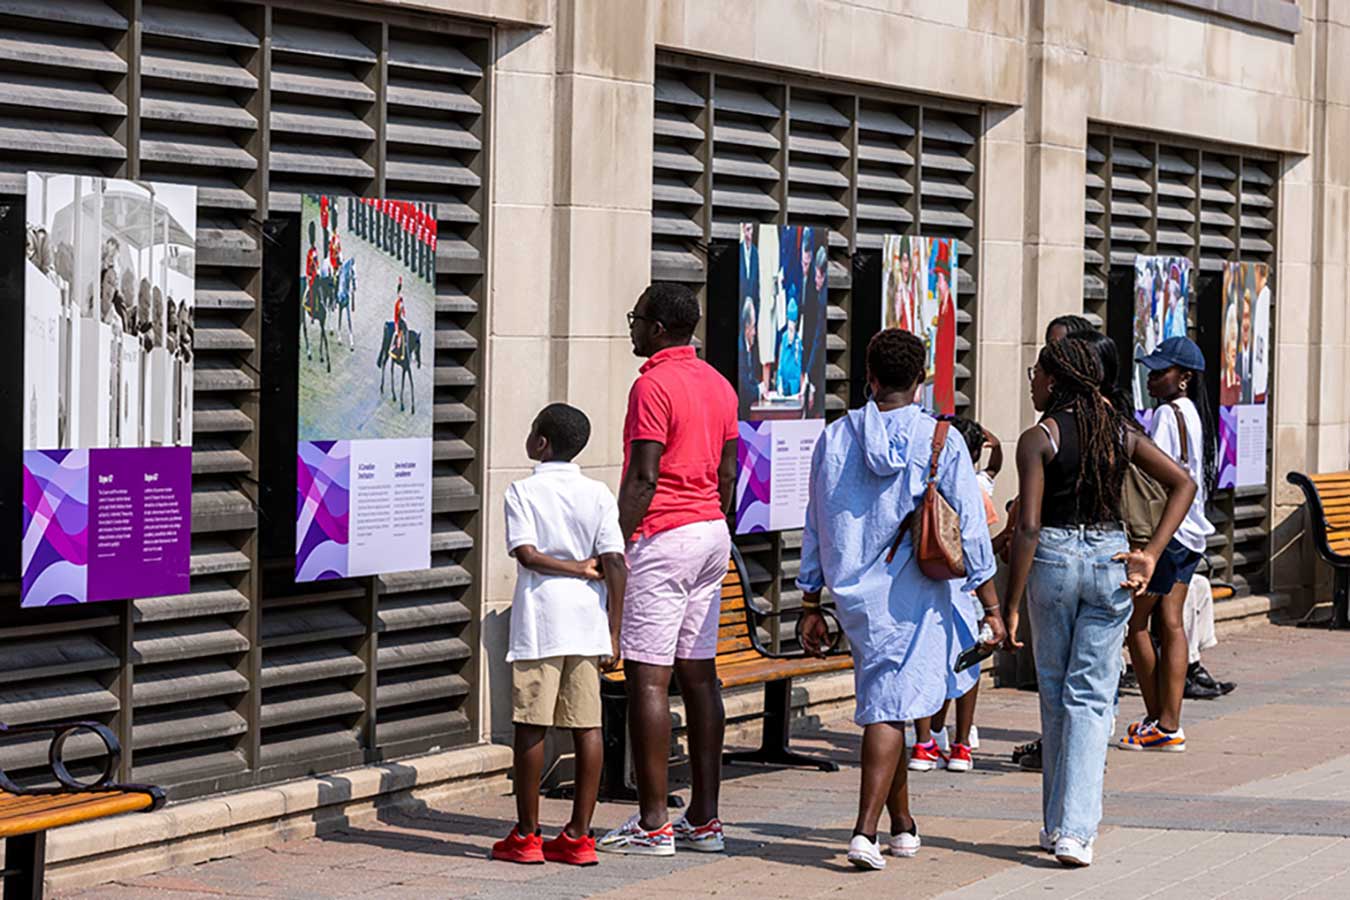 People walking by and looking at an outdoor exhibit composed of panels with photos and texts.